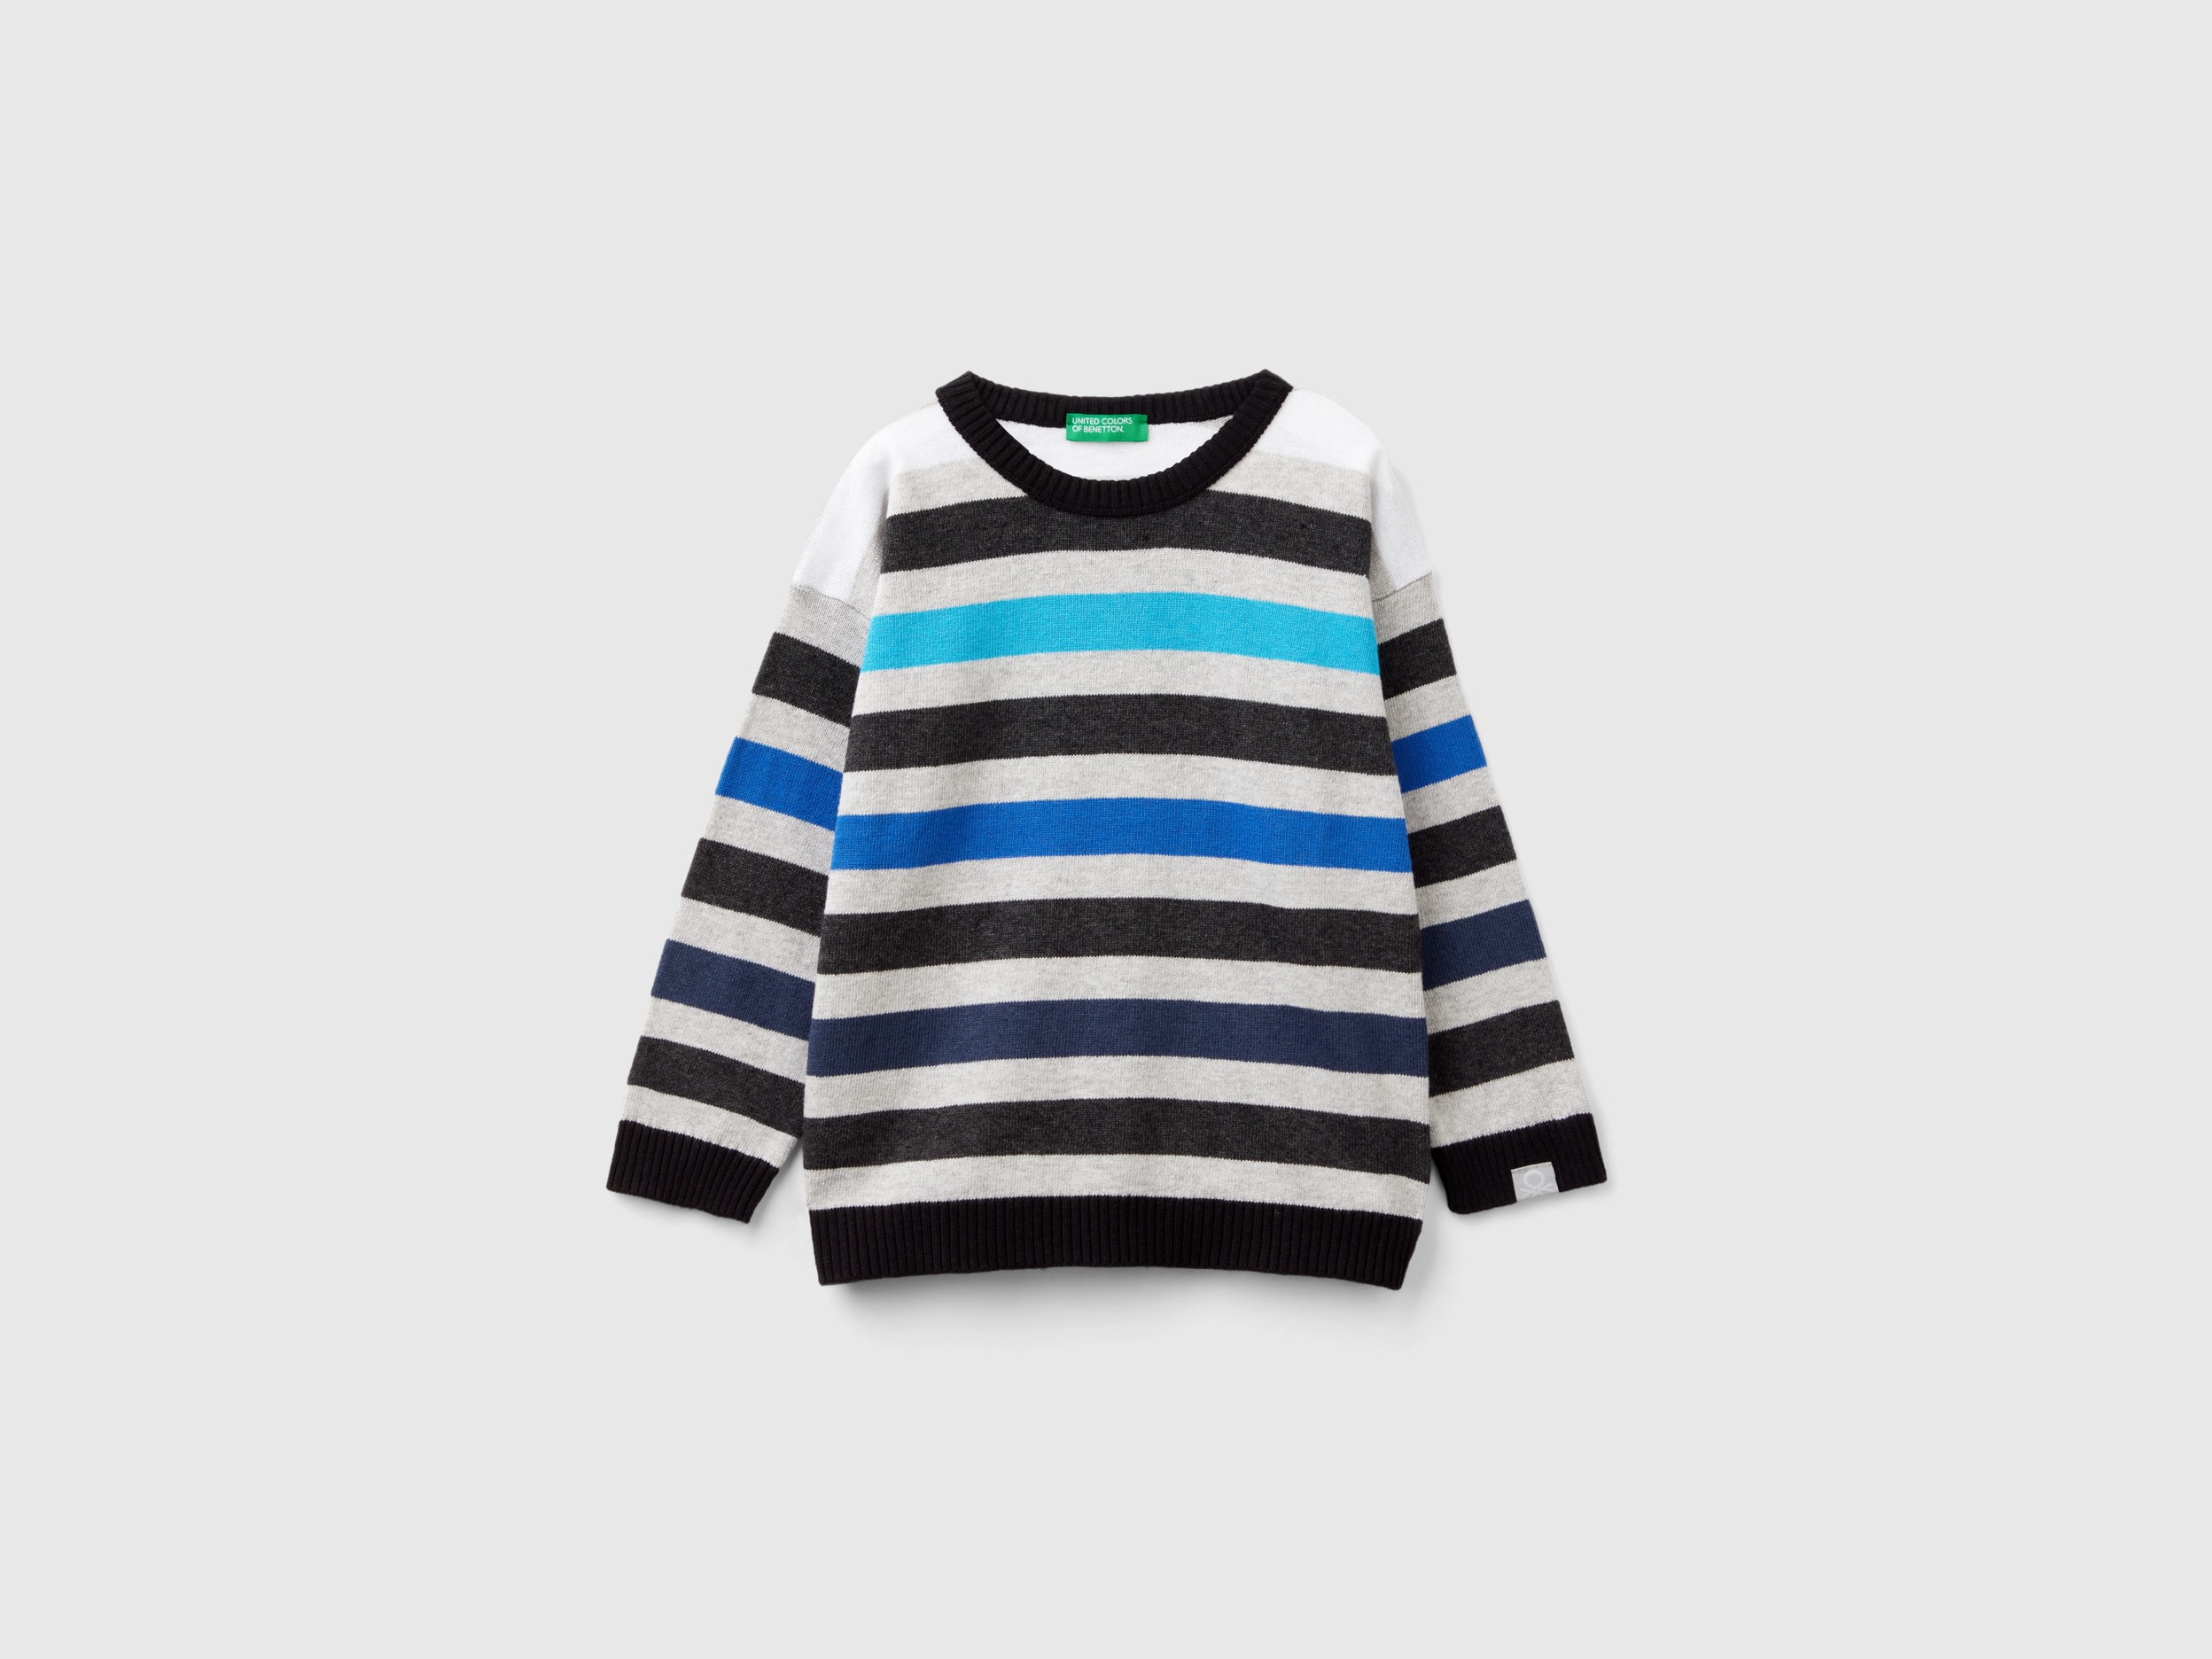 Image of Benetton, Striped Sweater, size 98, Multi-color, Kids